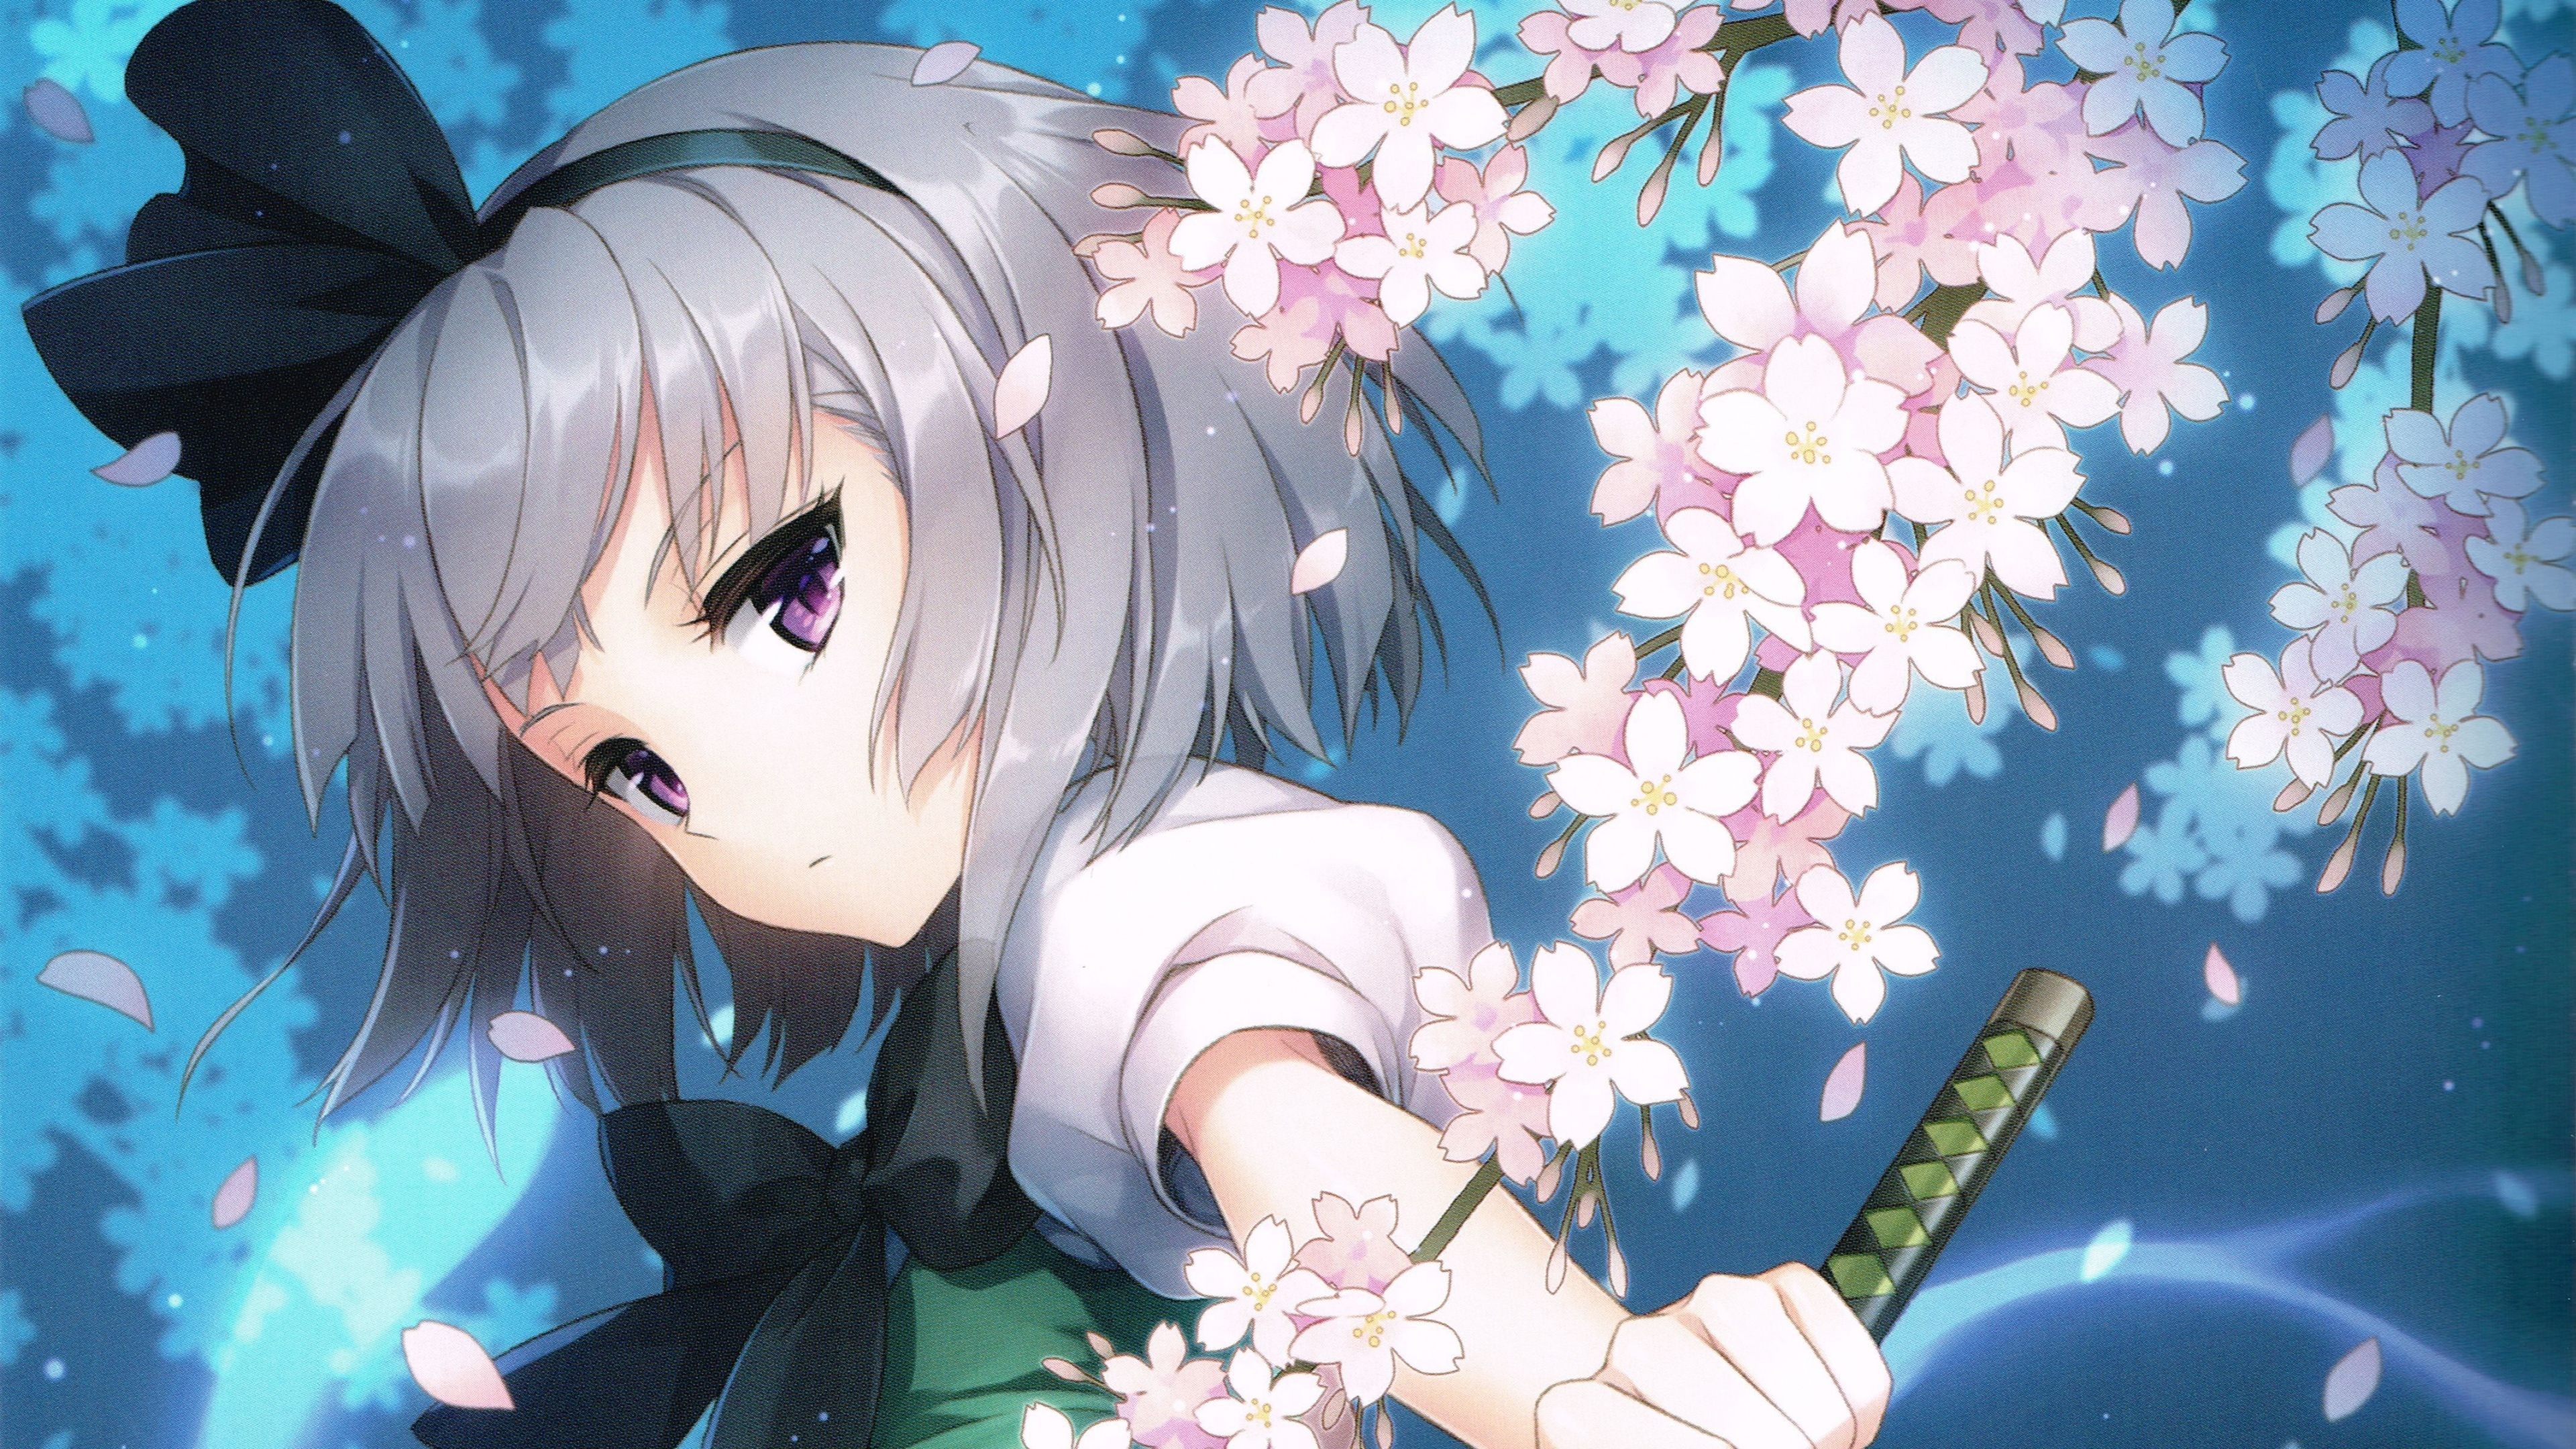 Anime girl wallpaper ·① Download free beautiful HD wallpapers for desktop and mobile devices in ...